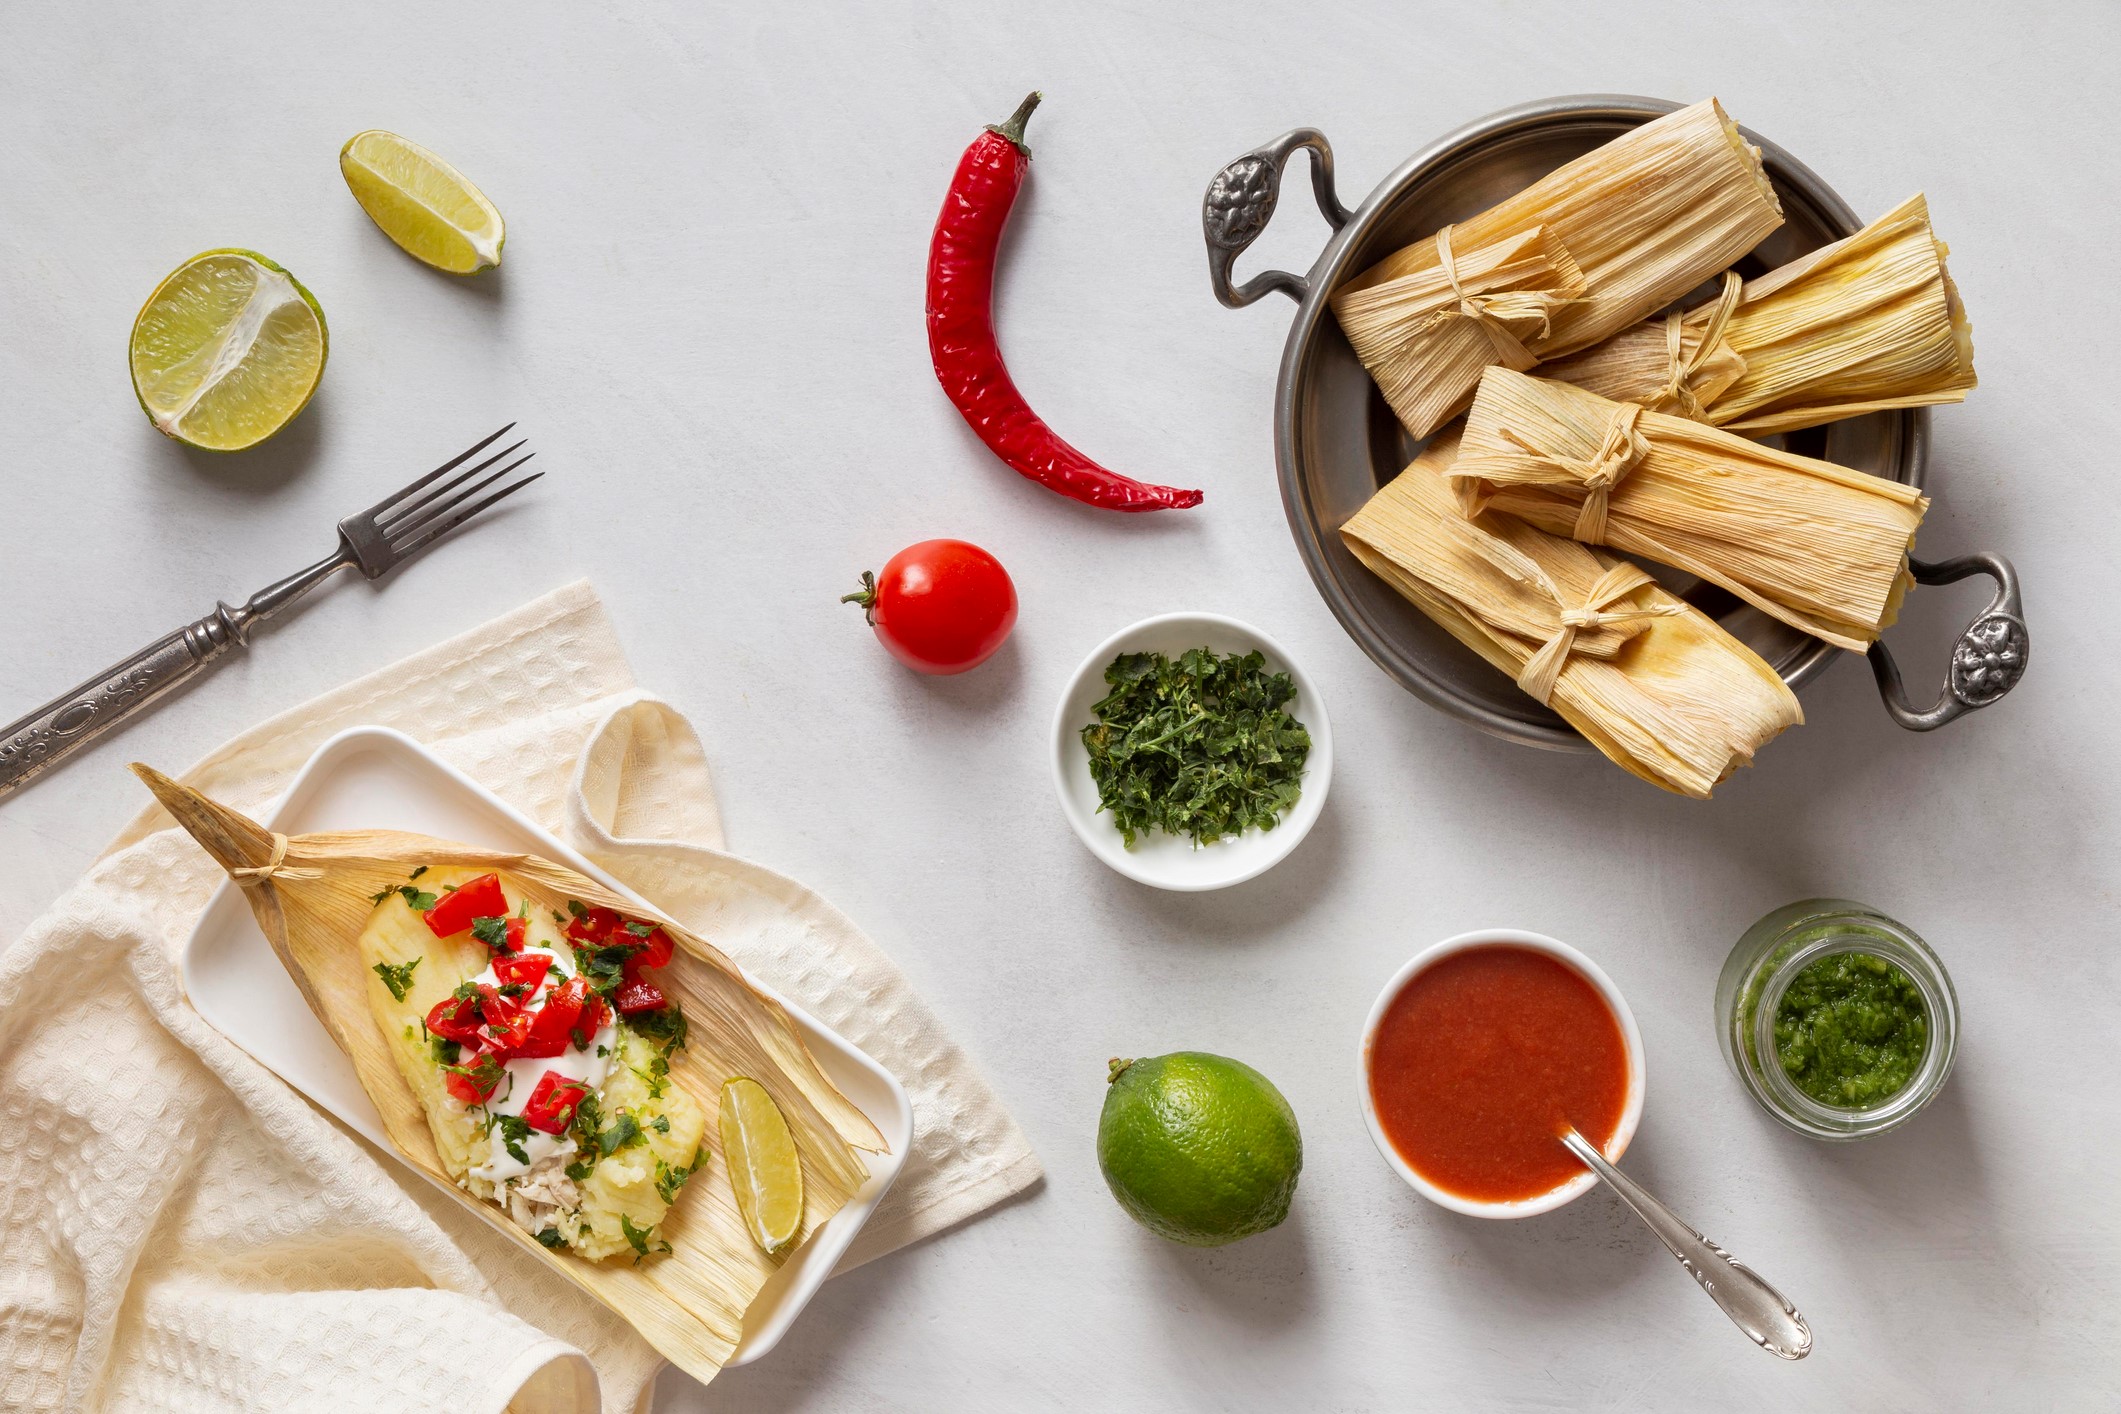 Tamales, peppers, and other ingredients